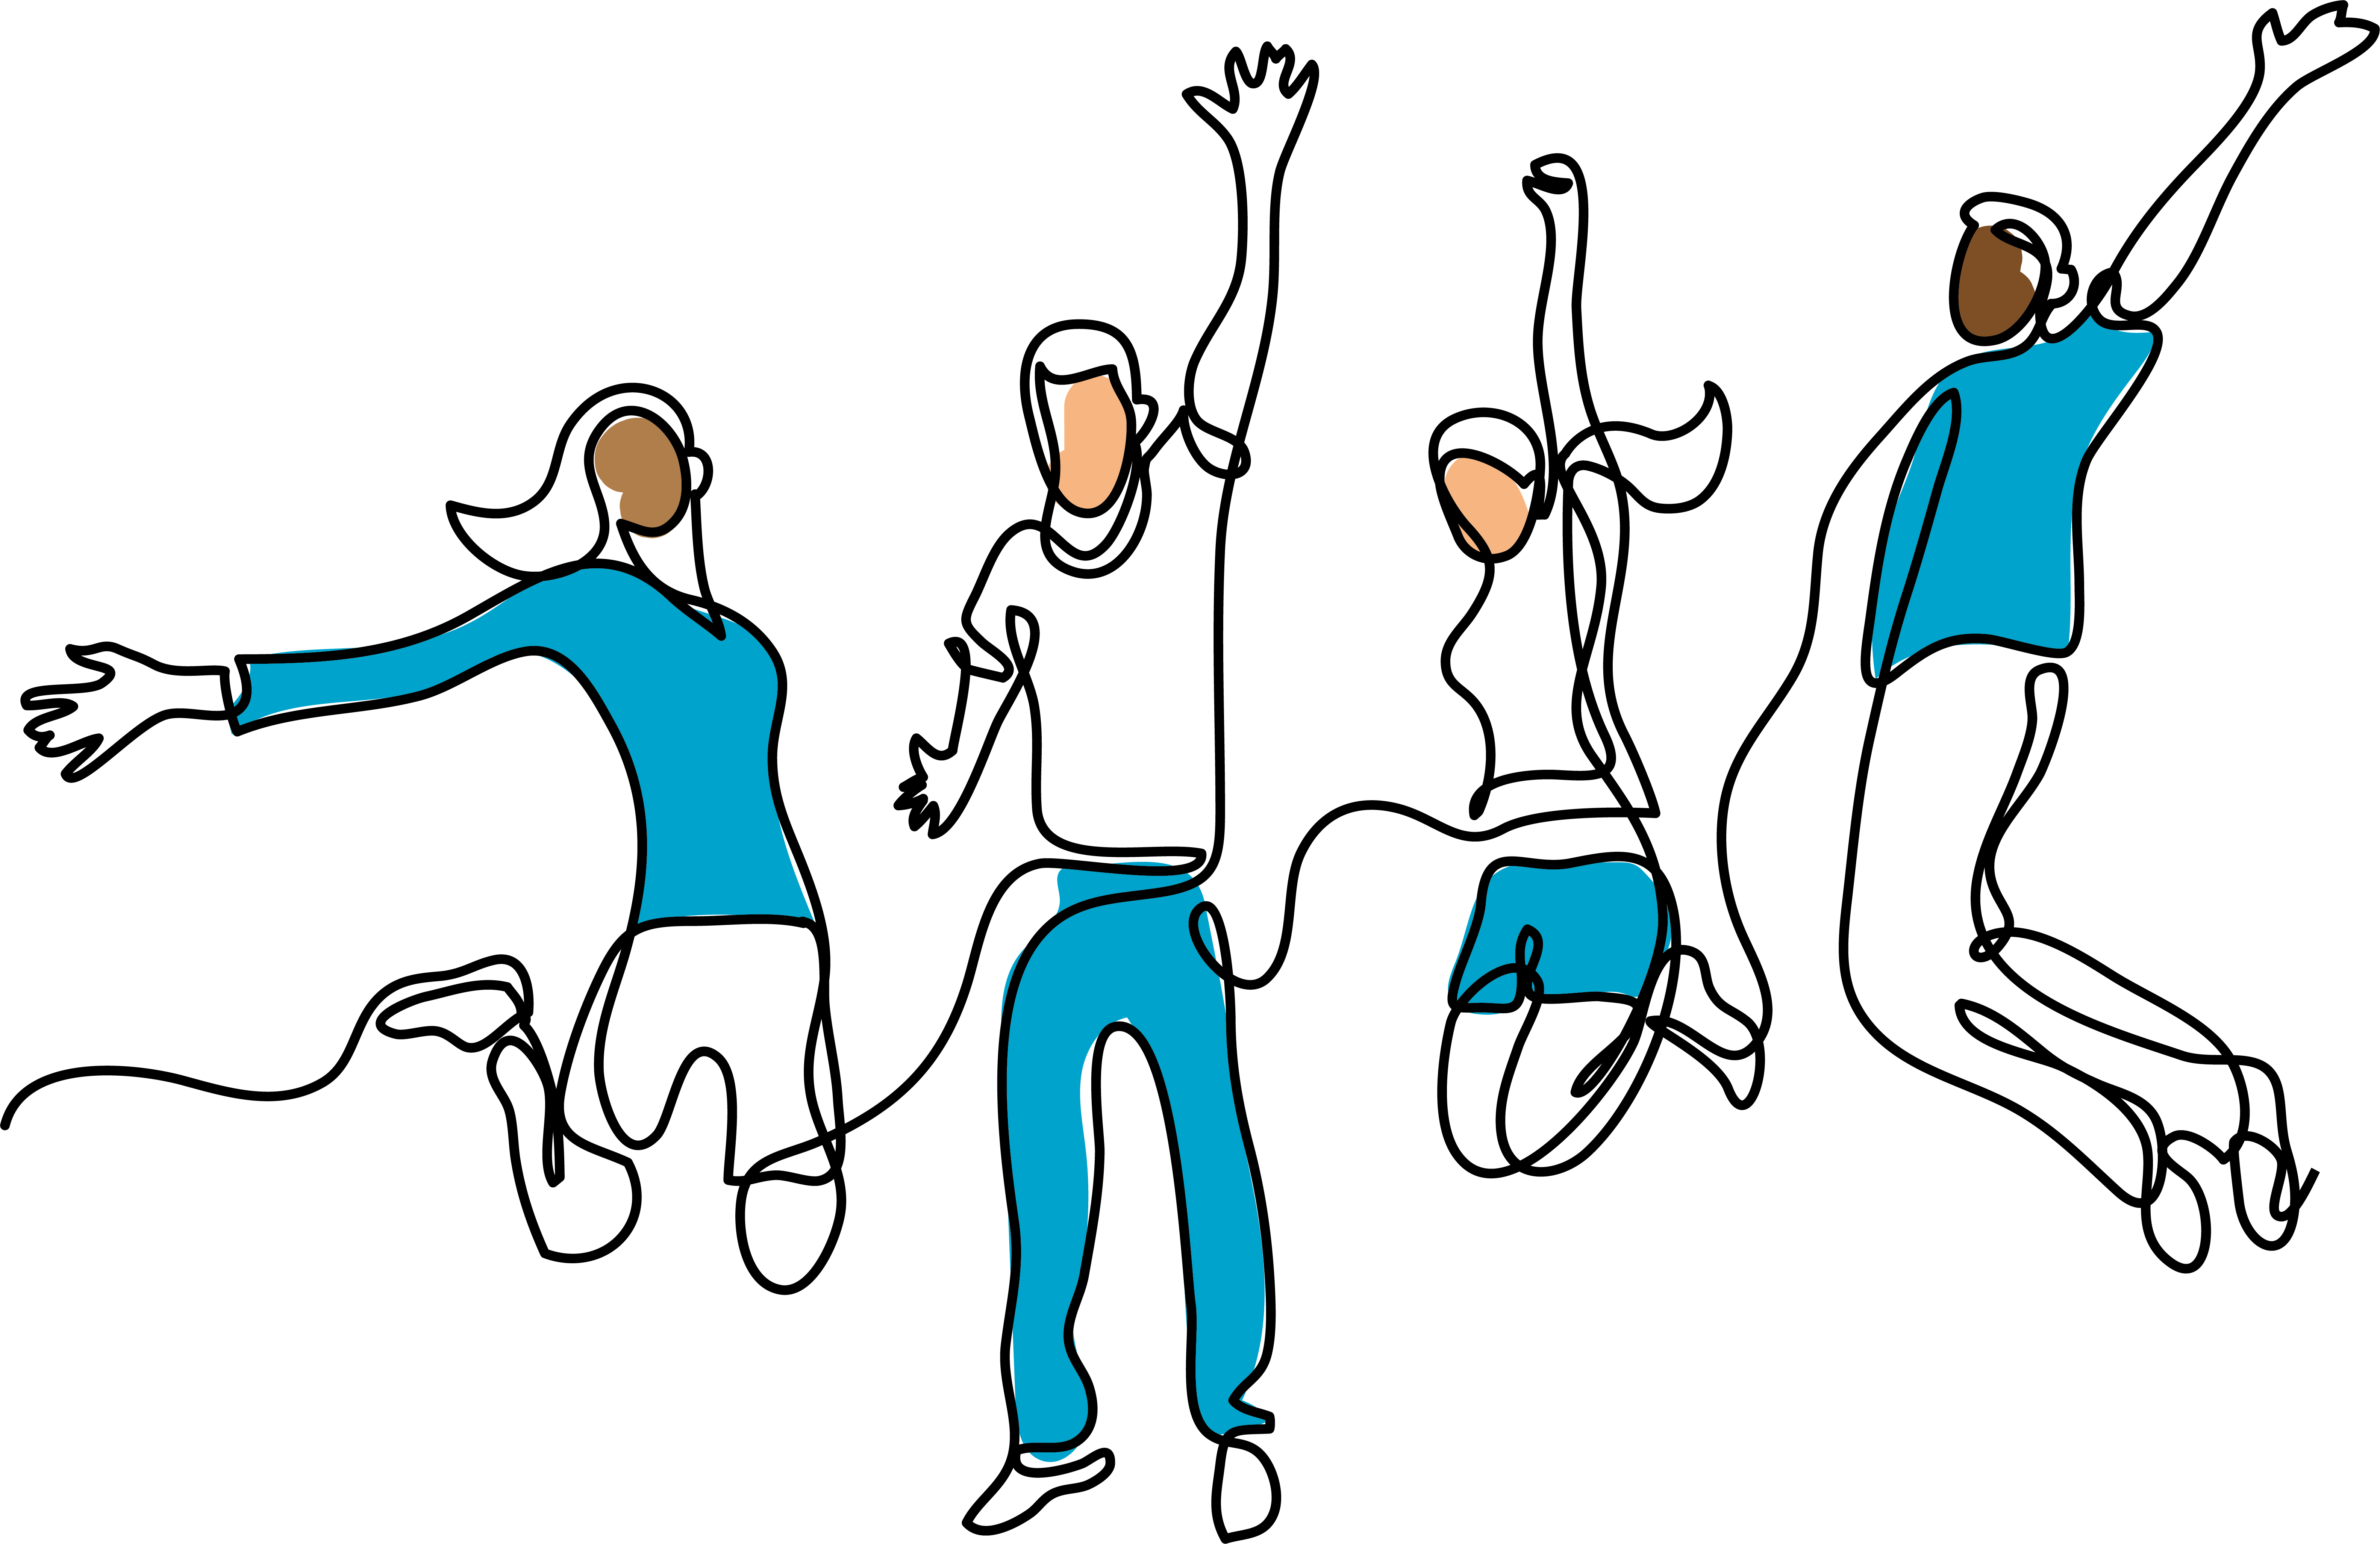 Trust branding image of 4 line drawn people jumping in the air